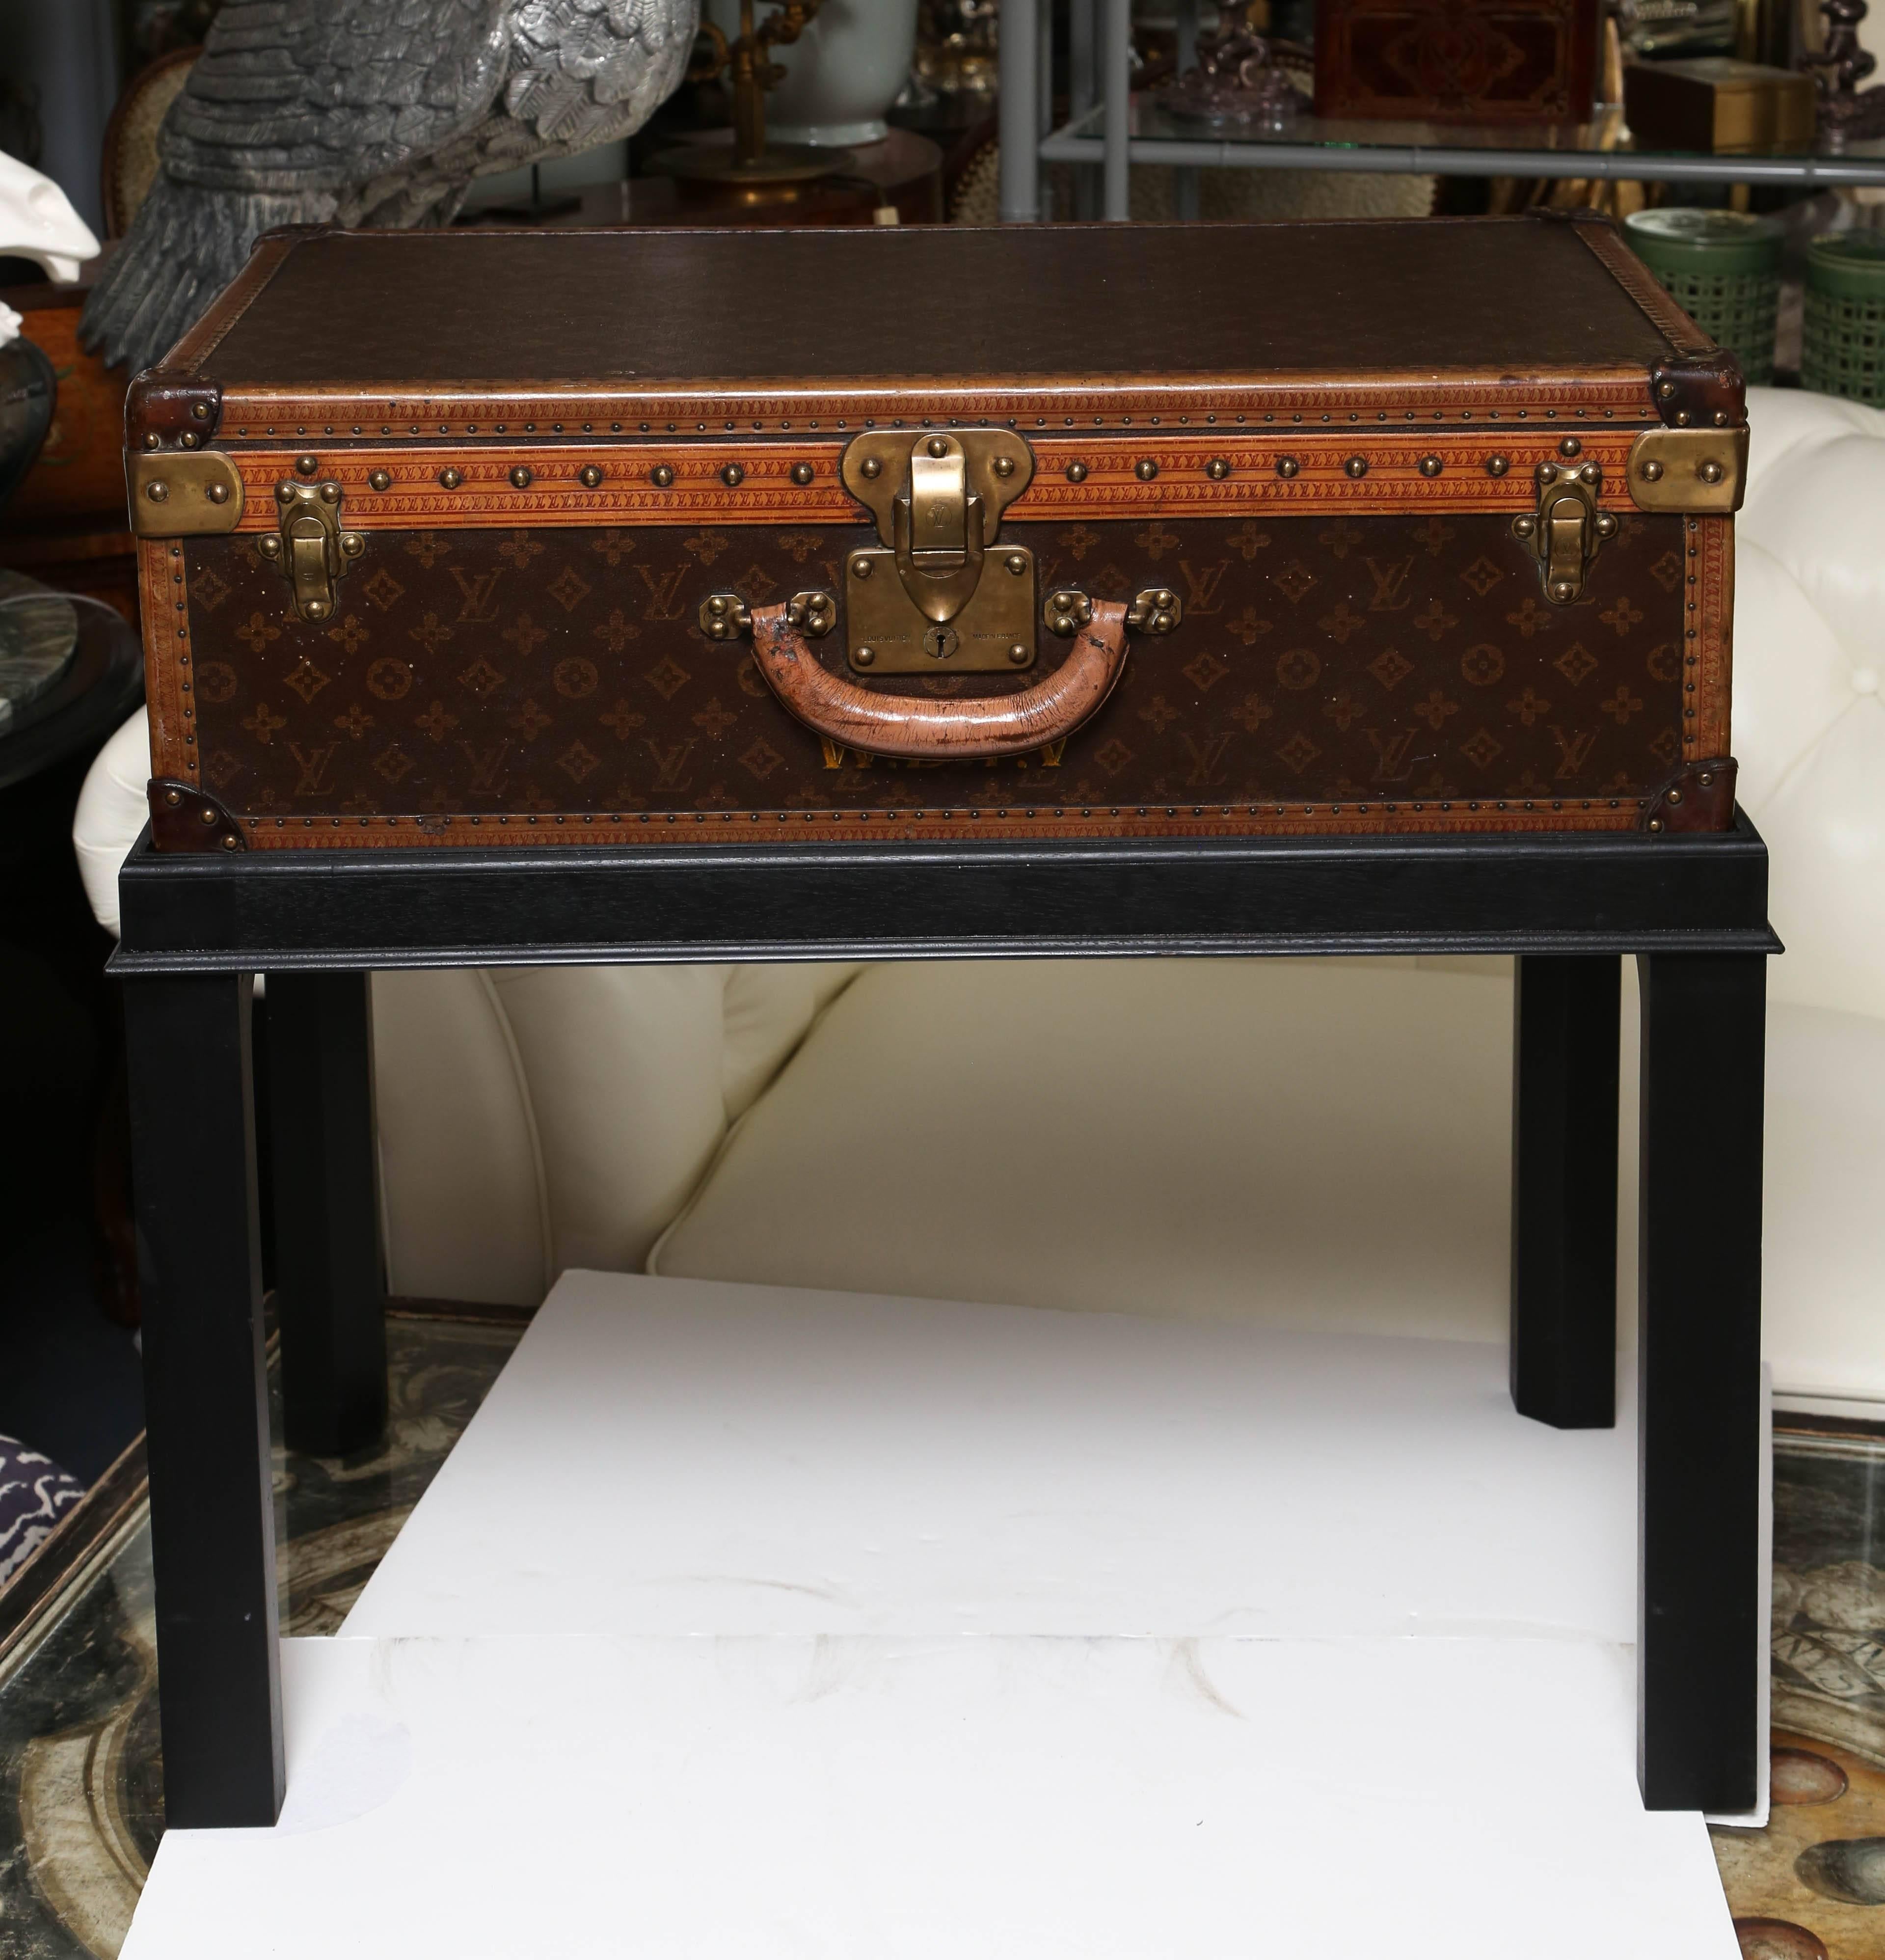 A fine example of the Classic luggage, fitted with custom base.
Measurements as a table H 26.75